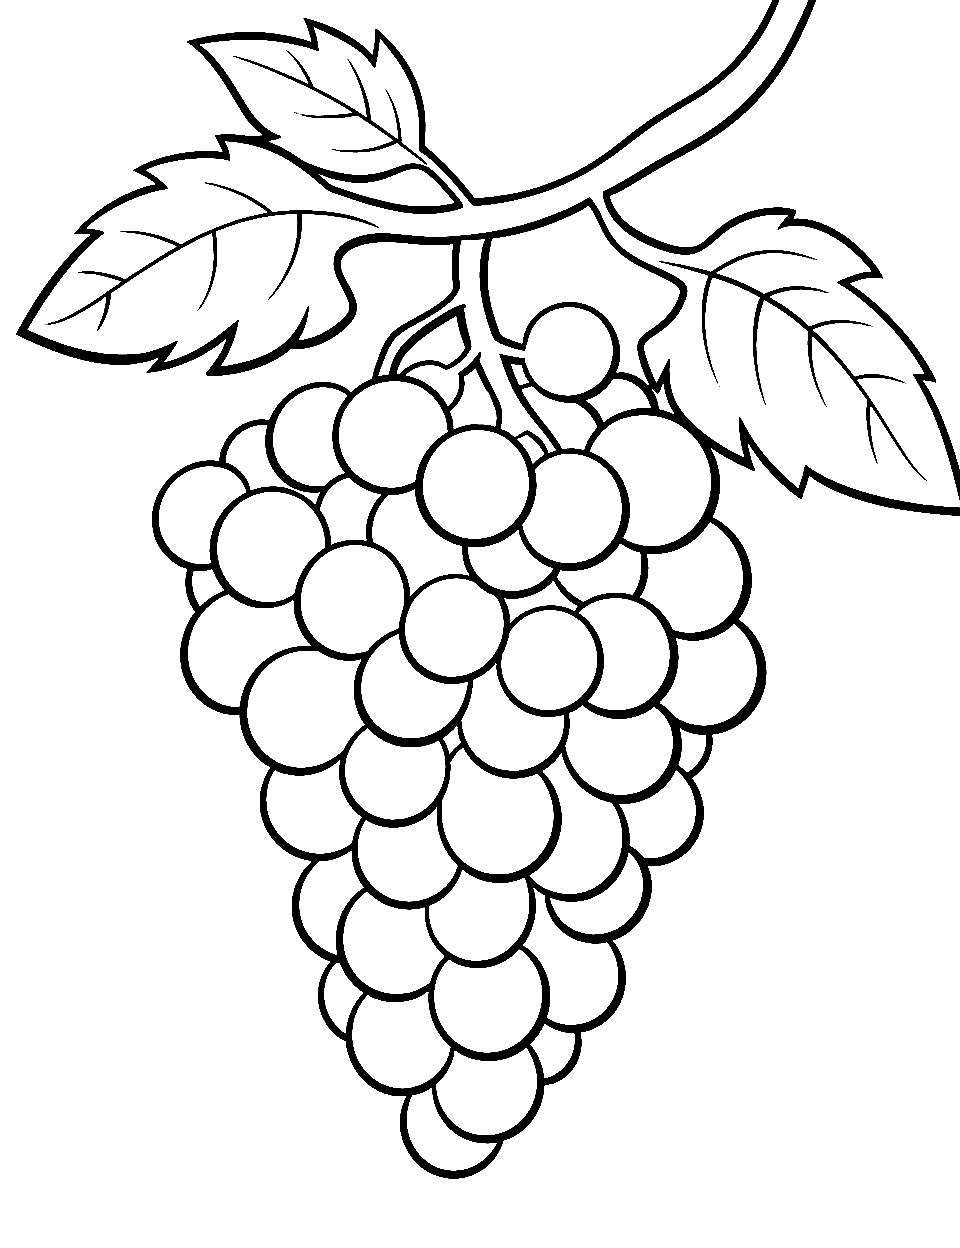 Grape Glee Coloring Page - A bunch of grapes hanging from a vine.